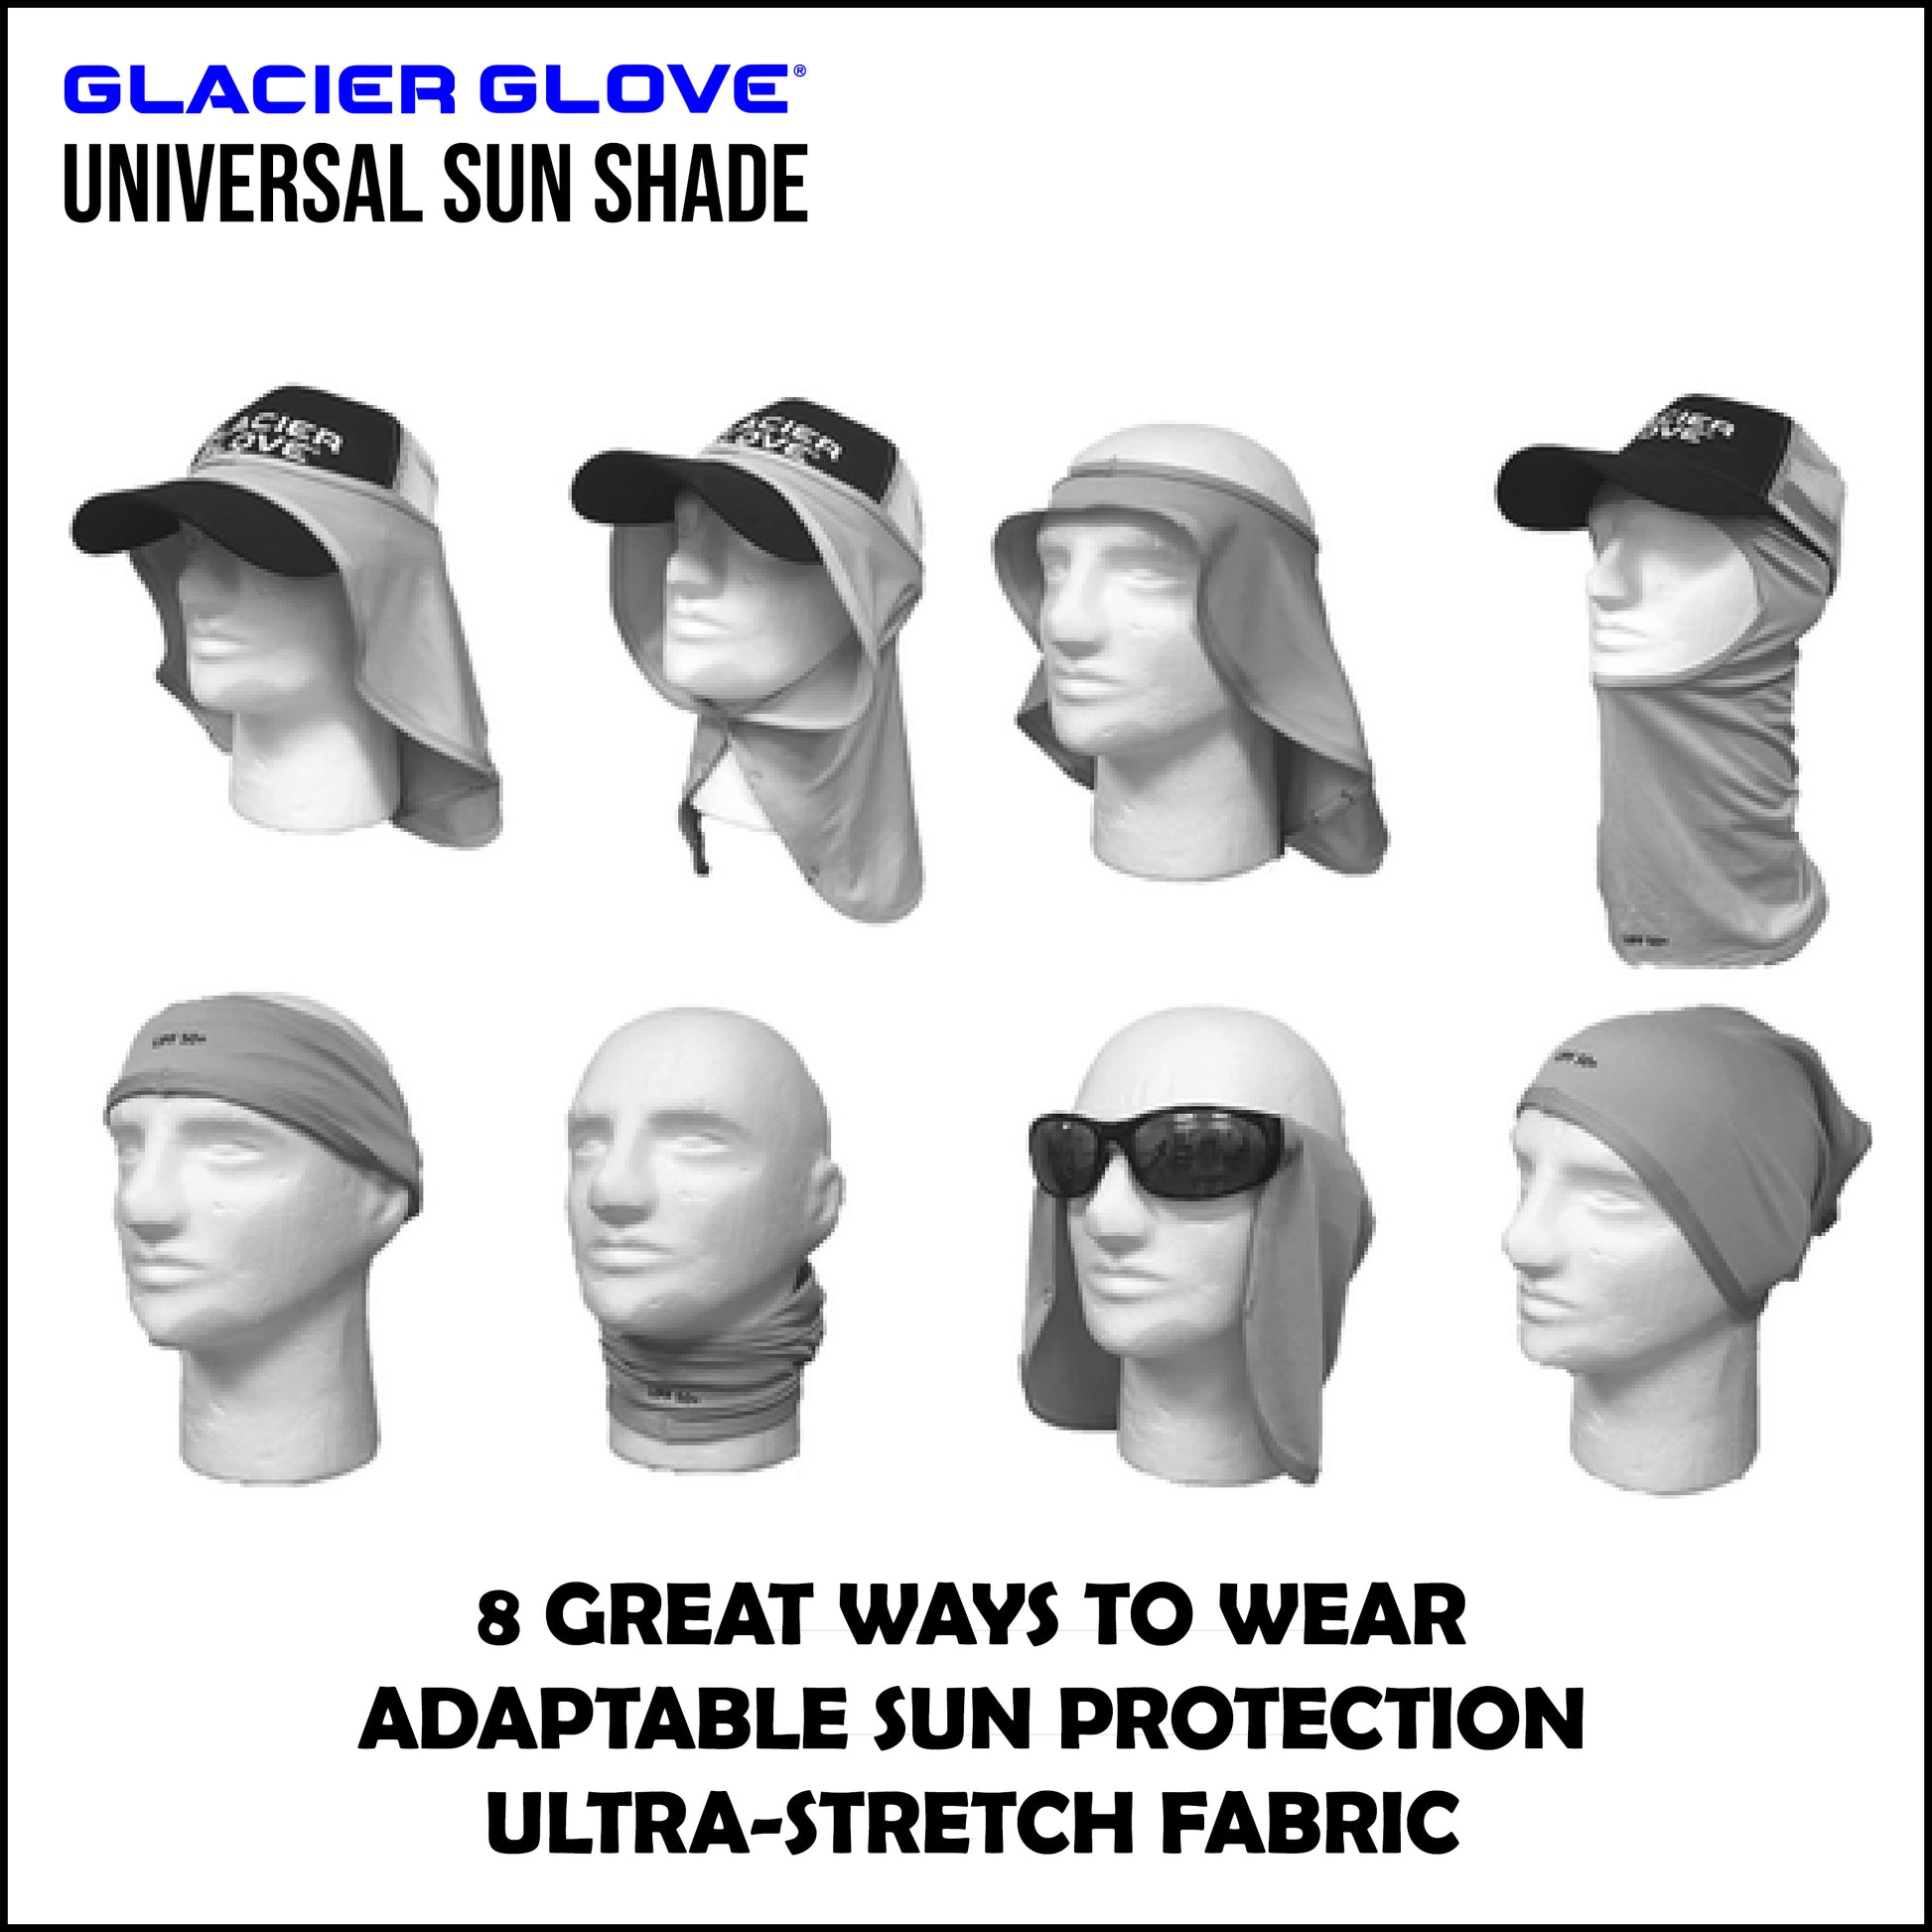 sun protection with ultra stretch fabric